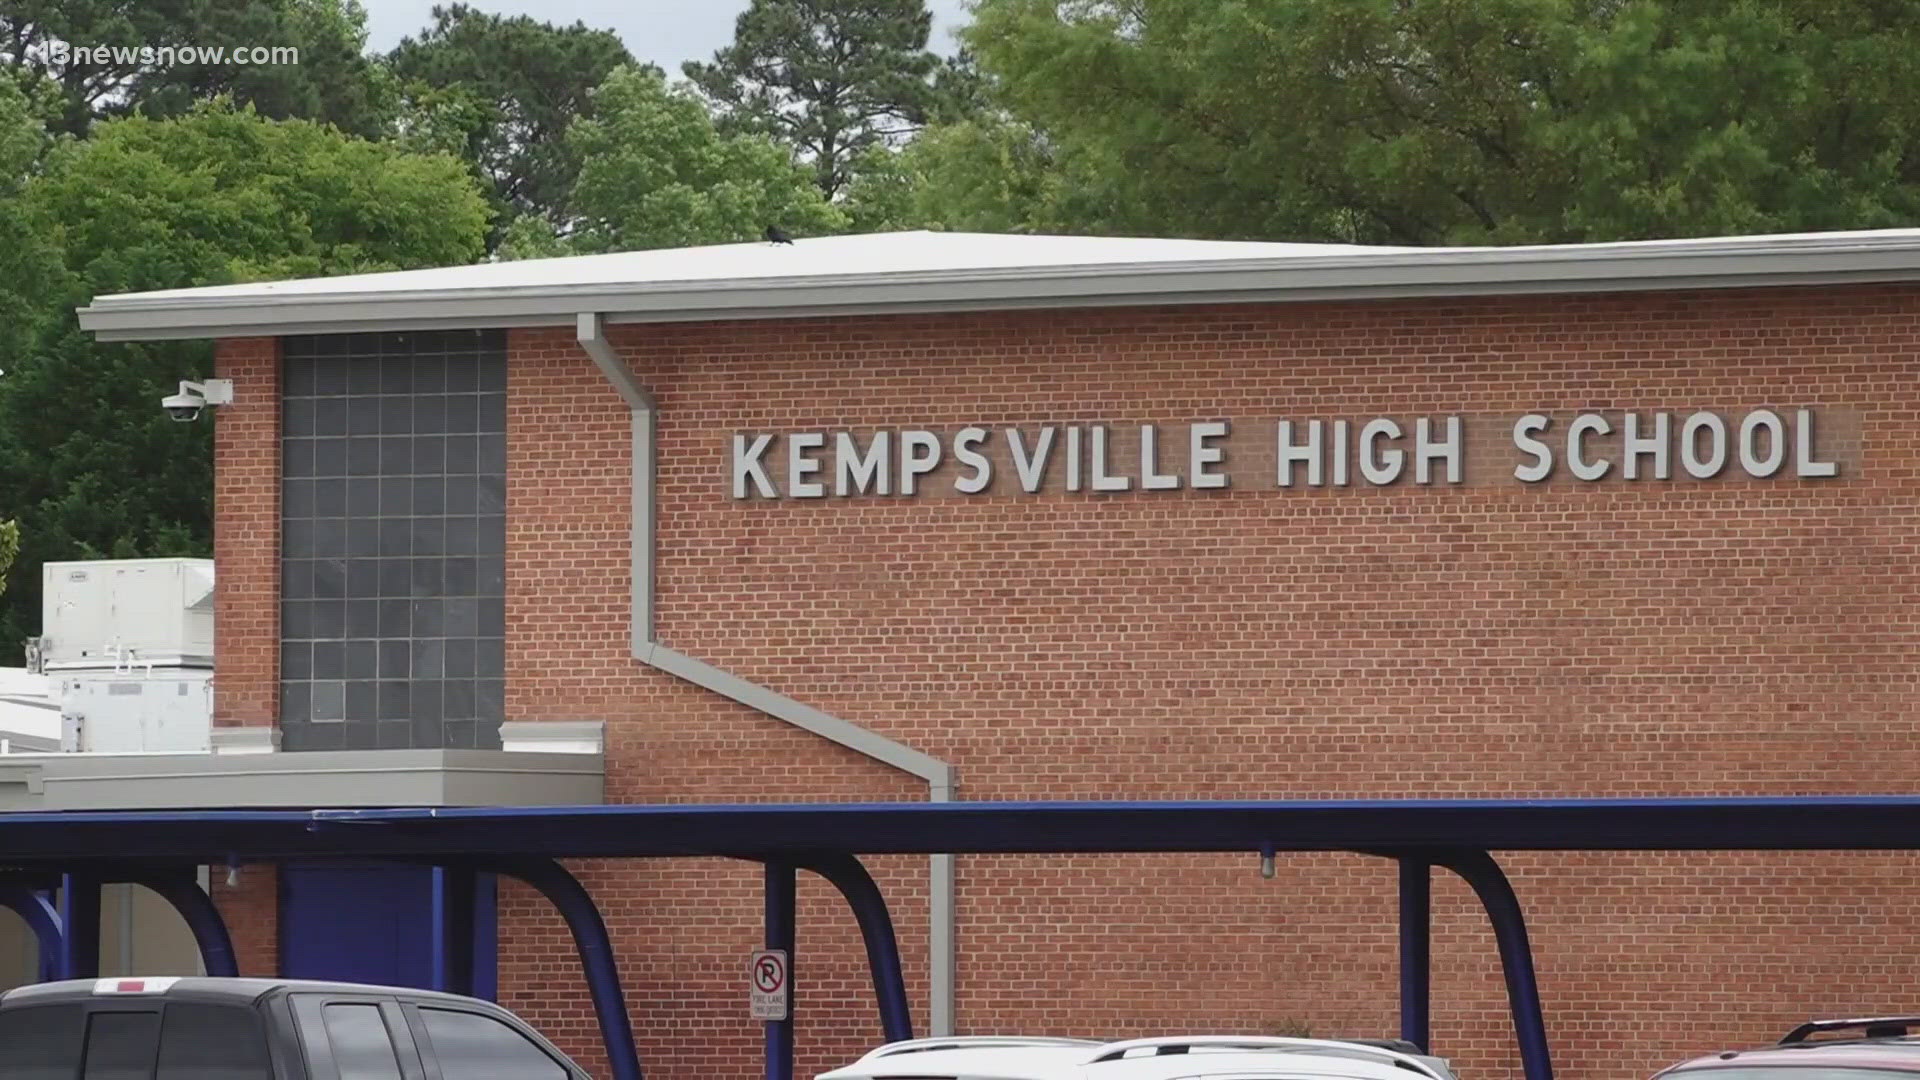 New details are being shared about the evidence of racism at Kempsville High School, as families of the victims share a public statement.